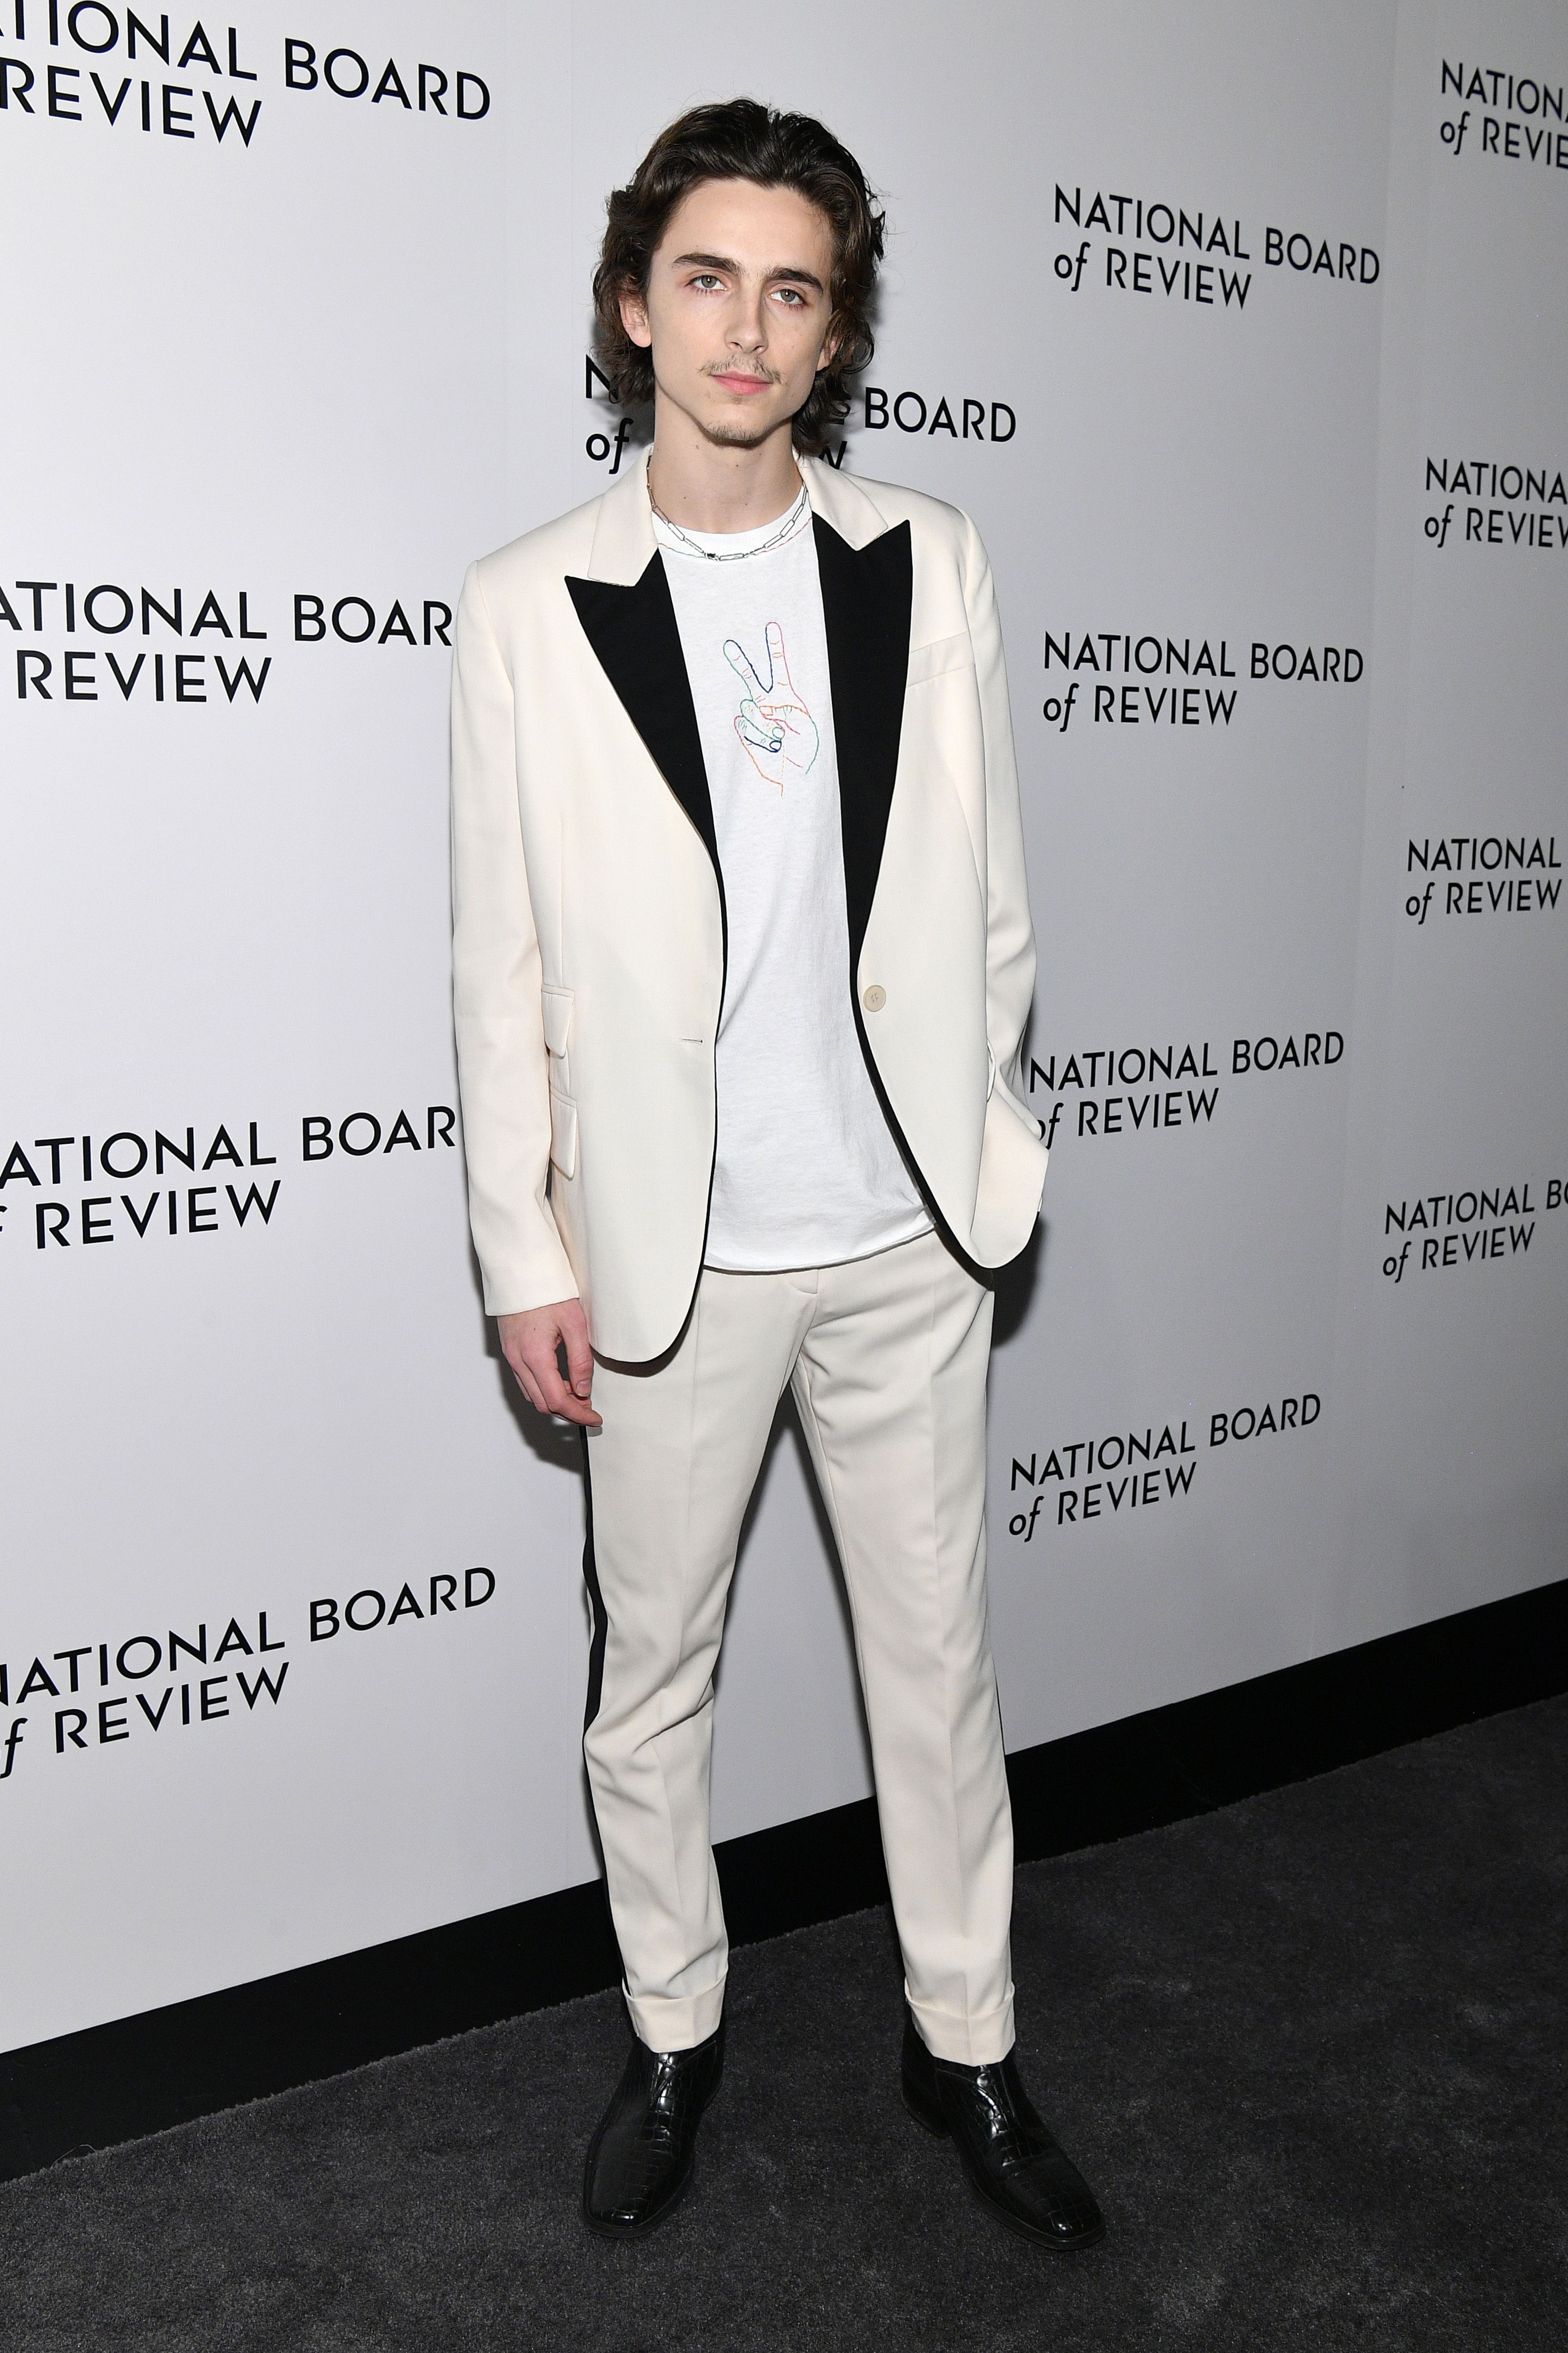 The fashion judger: best and worst looks of Timothée Chalamet